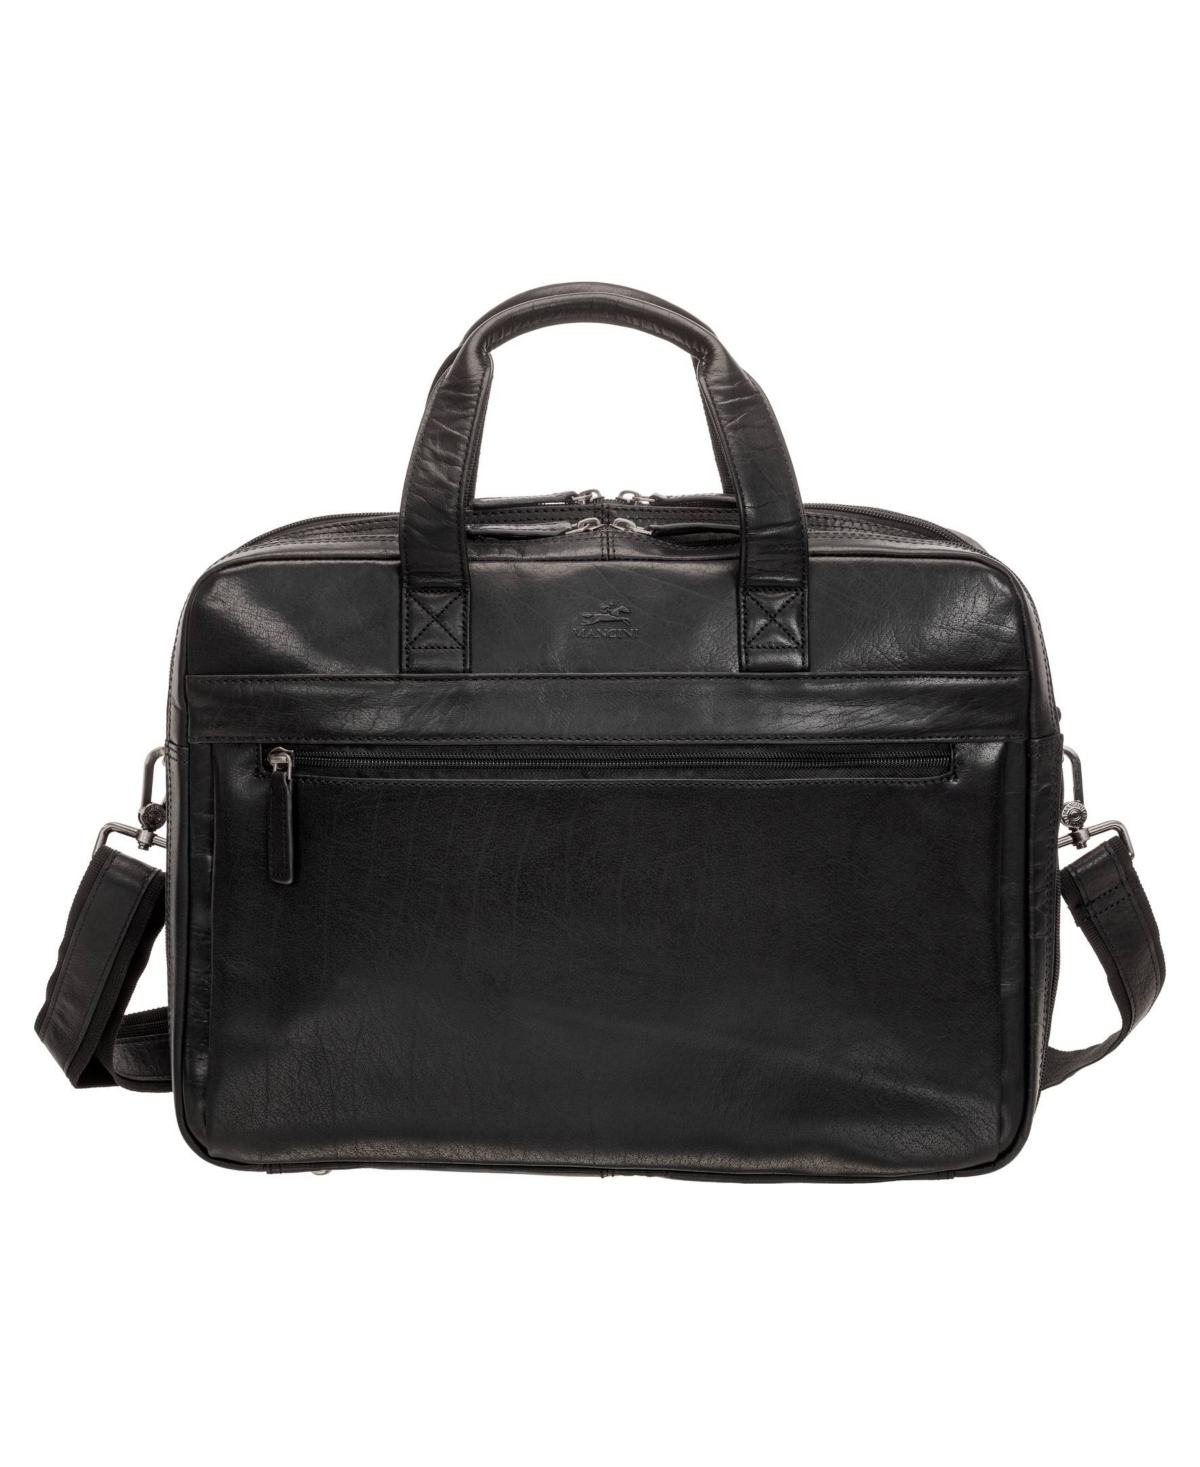 Men's Buffalo Double Compartment Briefcase for 15.6" Laptop and Tablet - Black